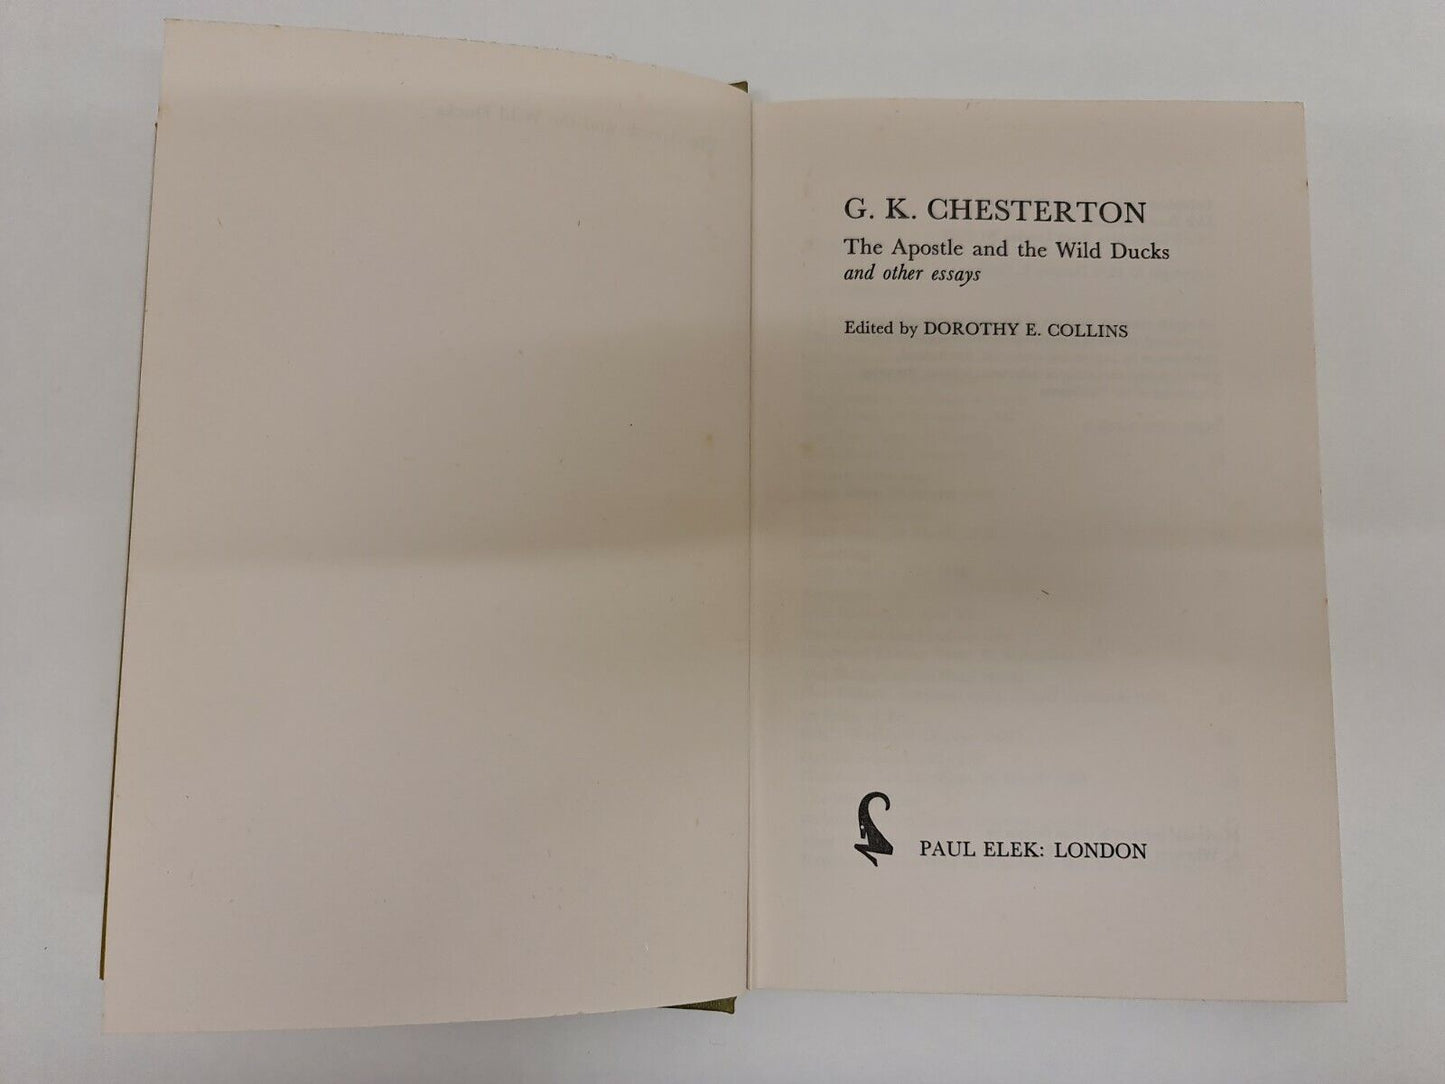 Apostle and the Wild Ducks and Other Essays by G. K. Chesterton (1975)